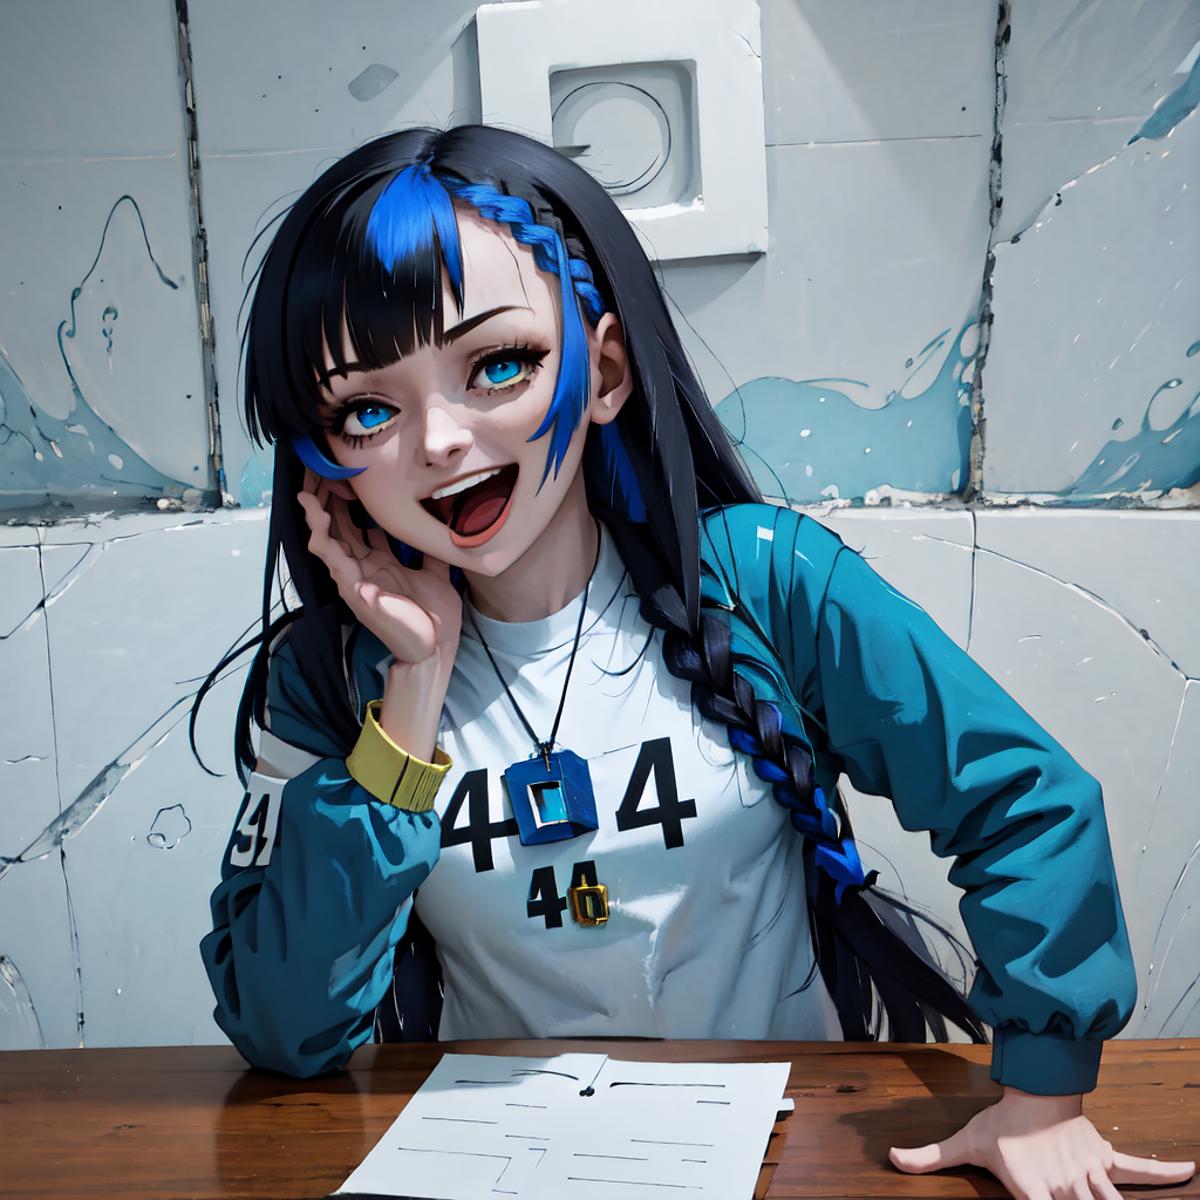 A cartoon anime character with blue hair, a white shirt, and a blue necklace sitting at a table.